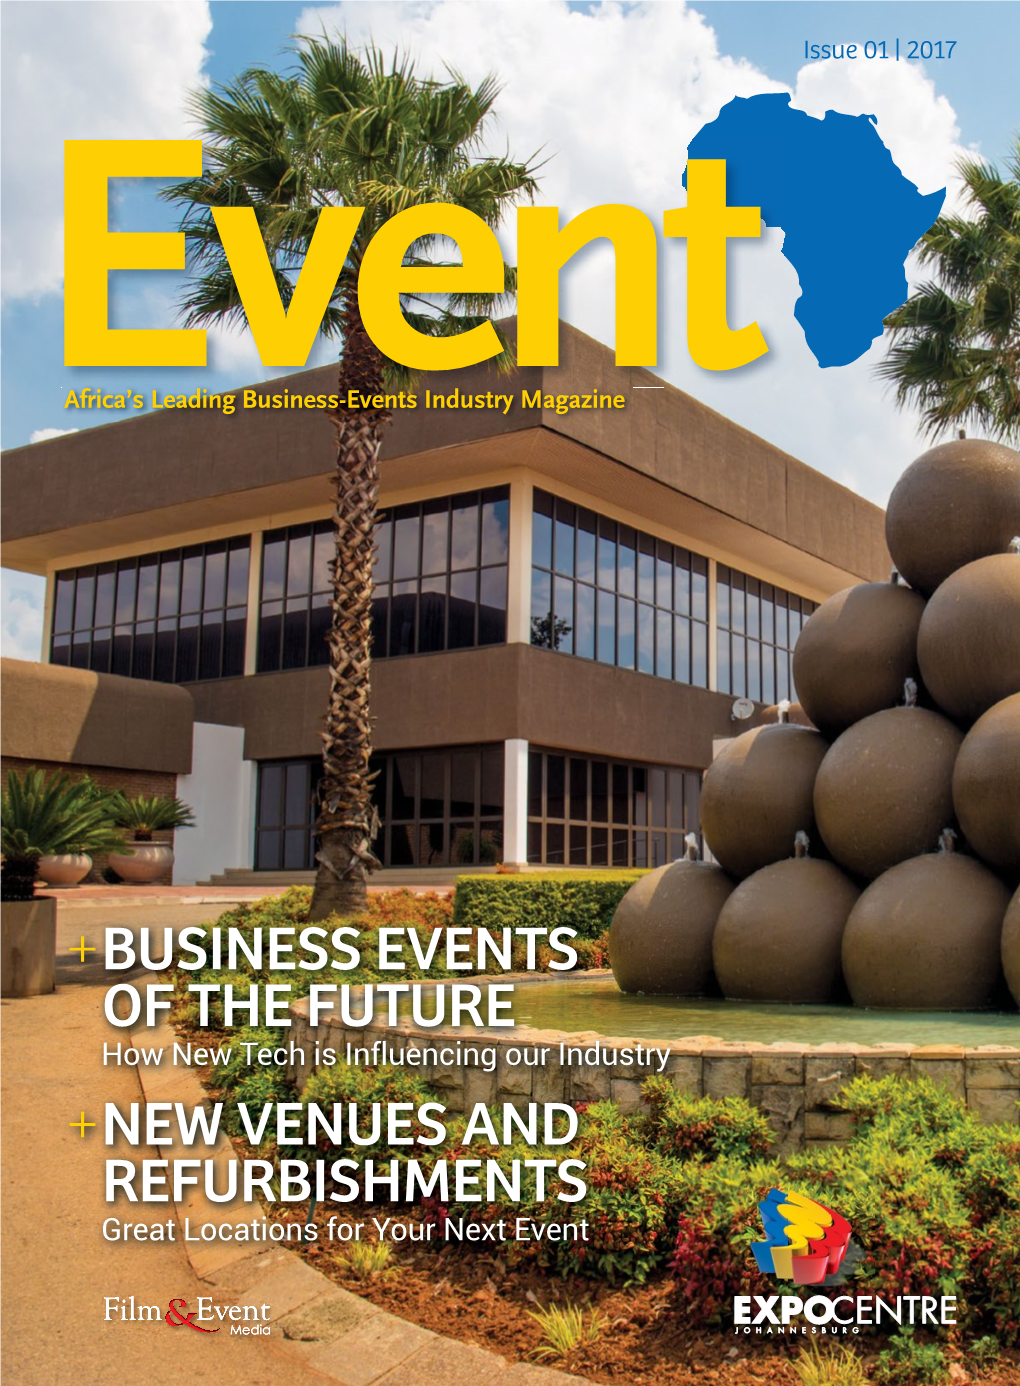 +Business Events of the Future +New Venues and Refurbishments